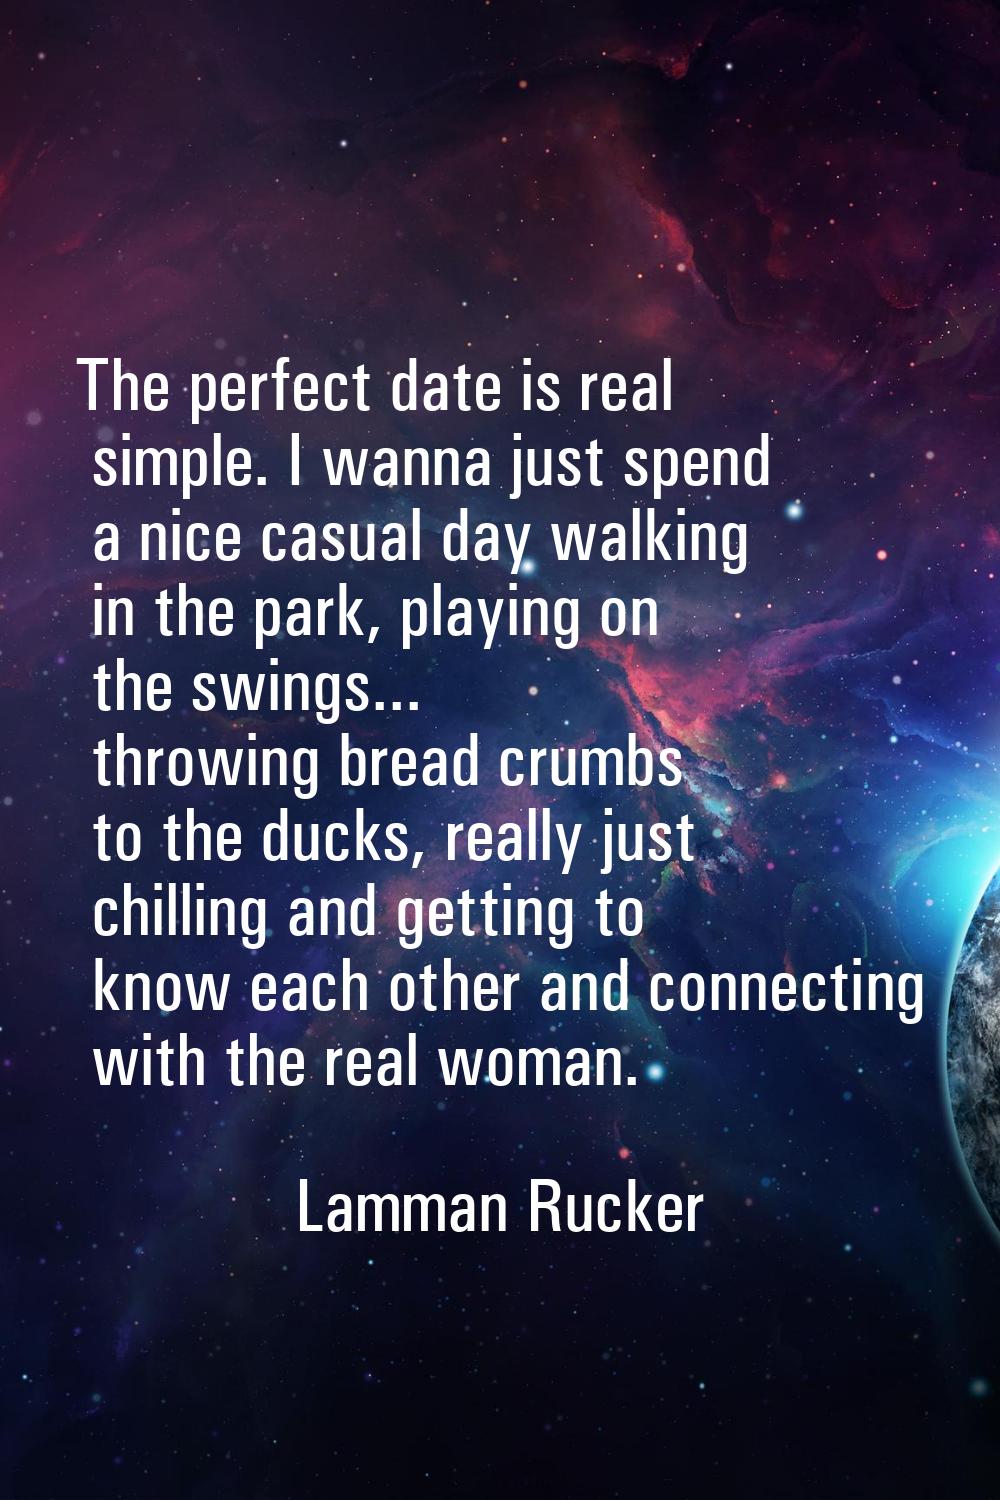 The perfect date is real simple. I wanna just spend a nice casual day walking in the park, playing 